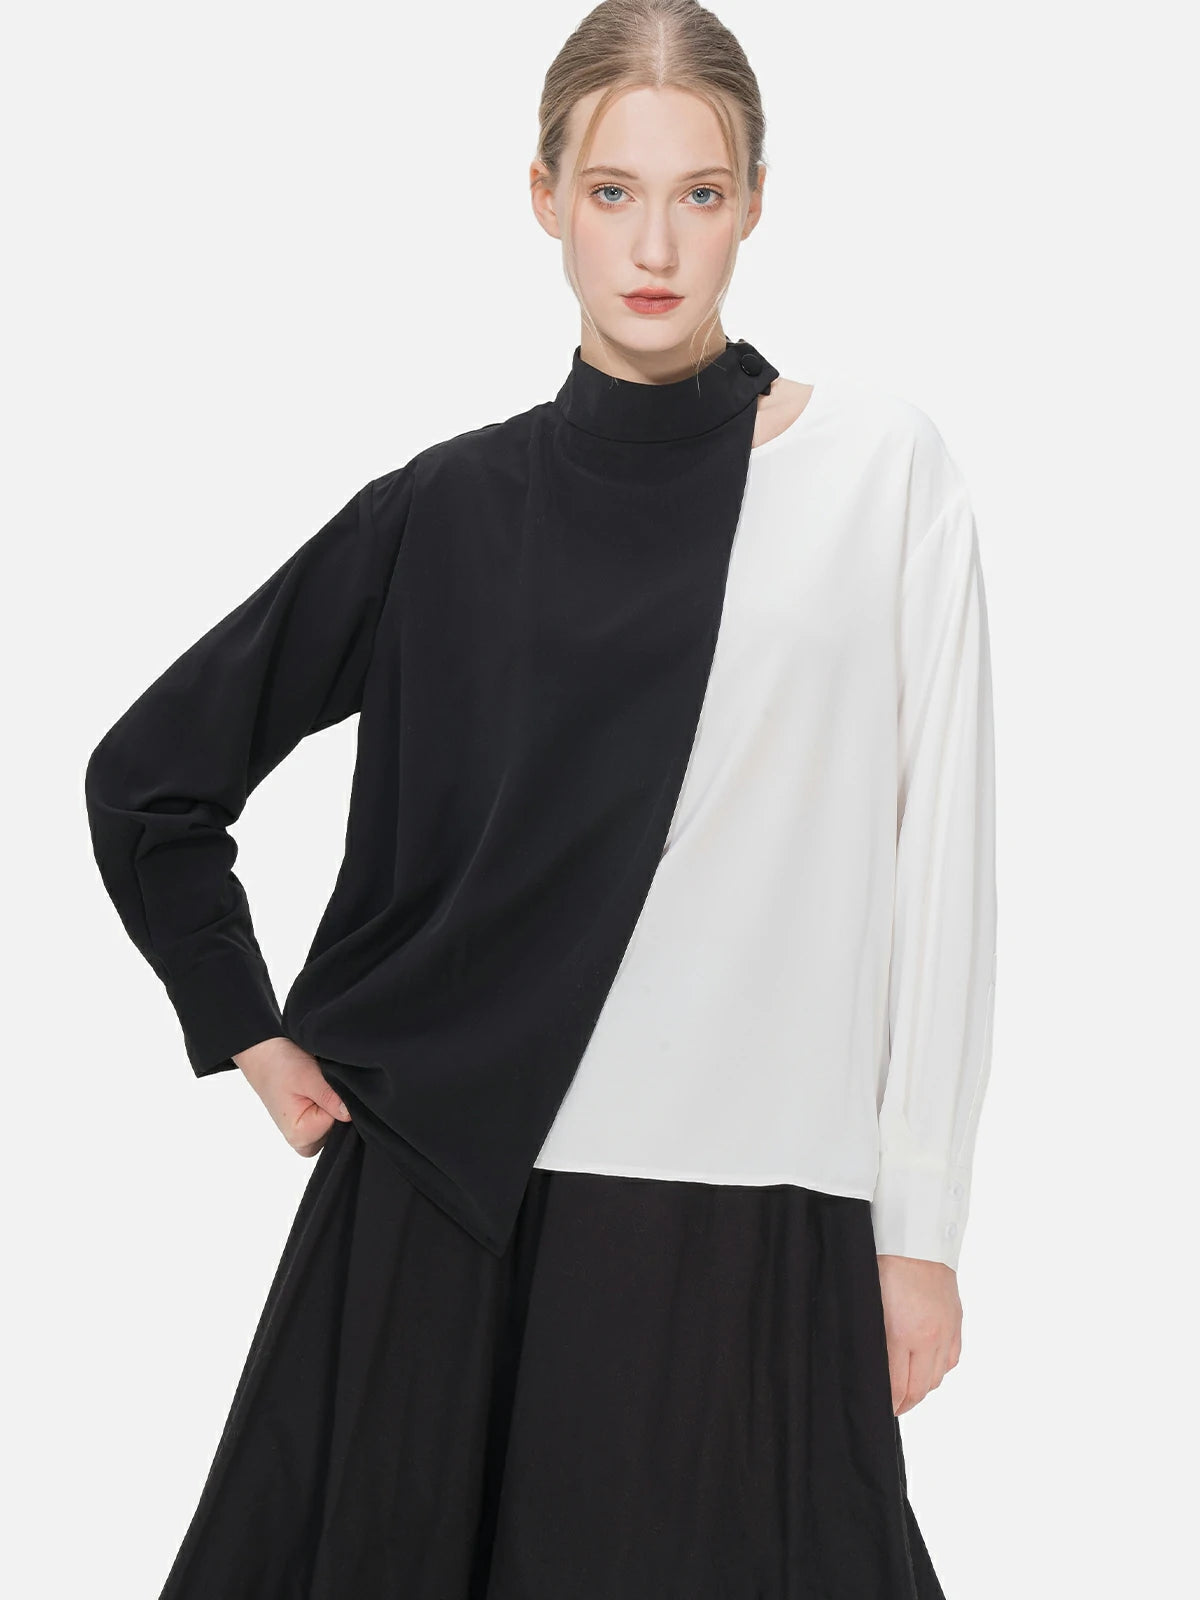 Modern and elegant black and white shirt with a collarbone hollow design, offering a fashion-forward and versatile option for confident and chic attire.